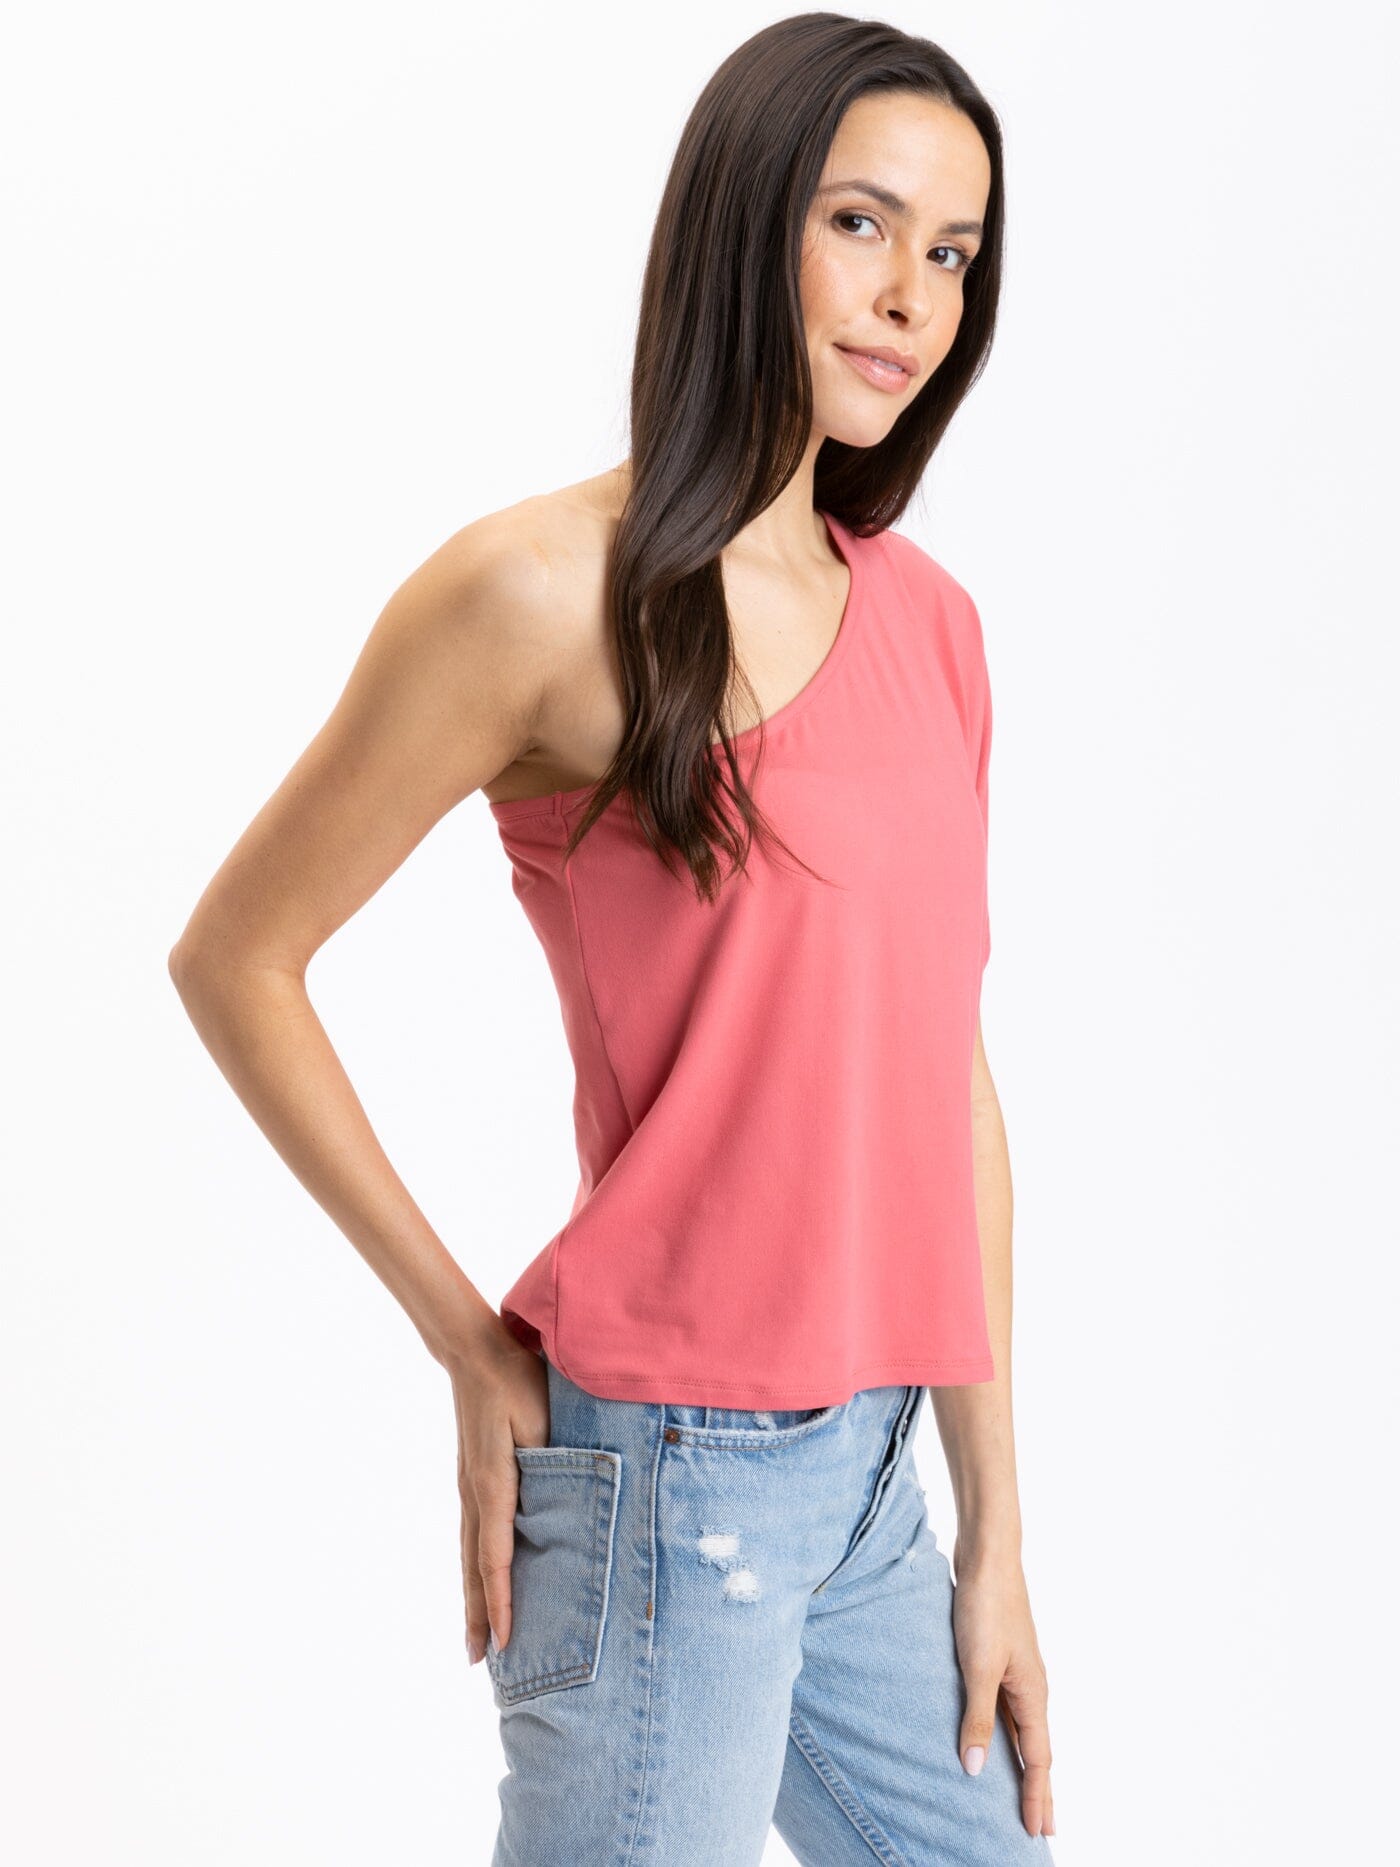 Shivani Modal Jersey One-Shoulder Top Womens Tops Short Threads 4 Thought 